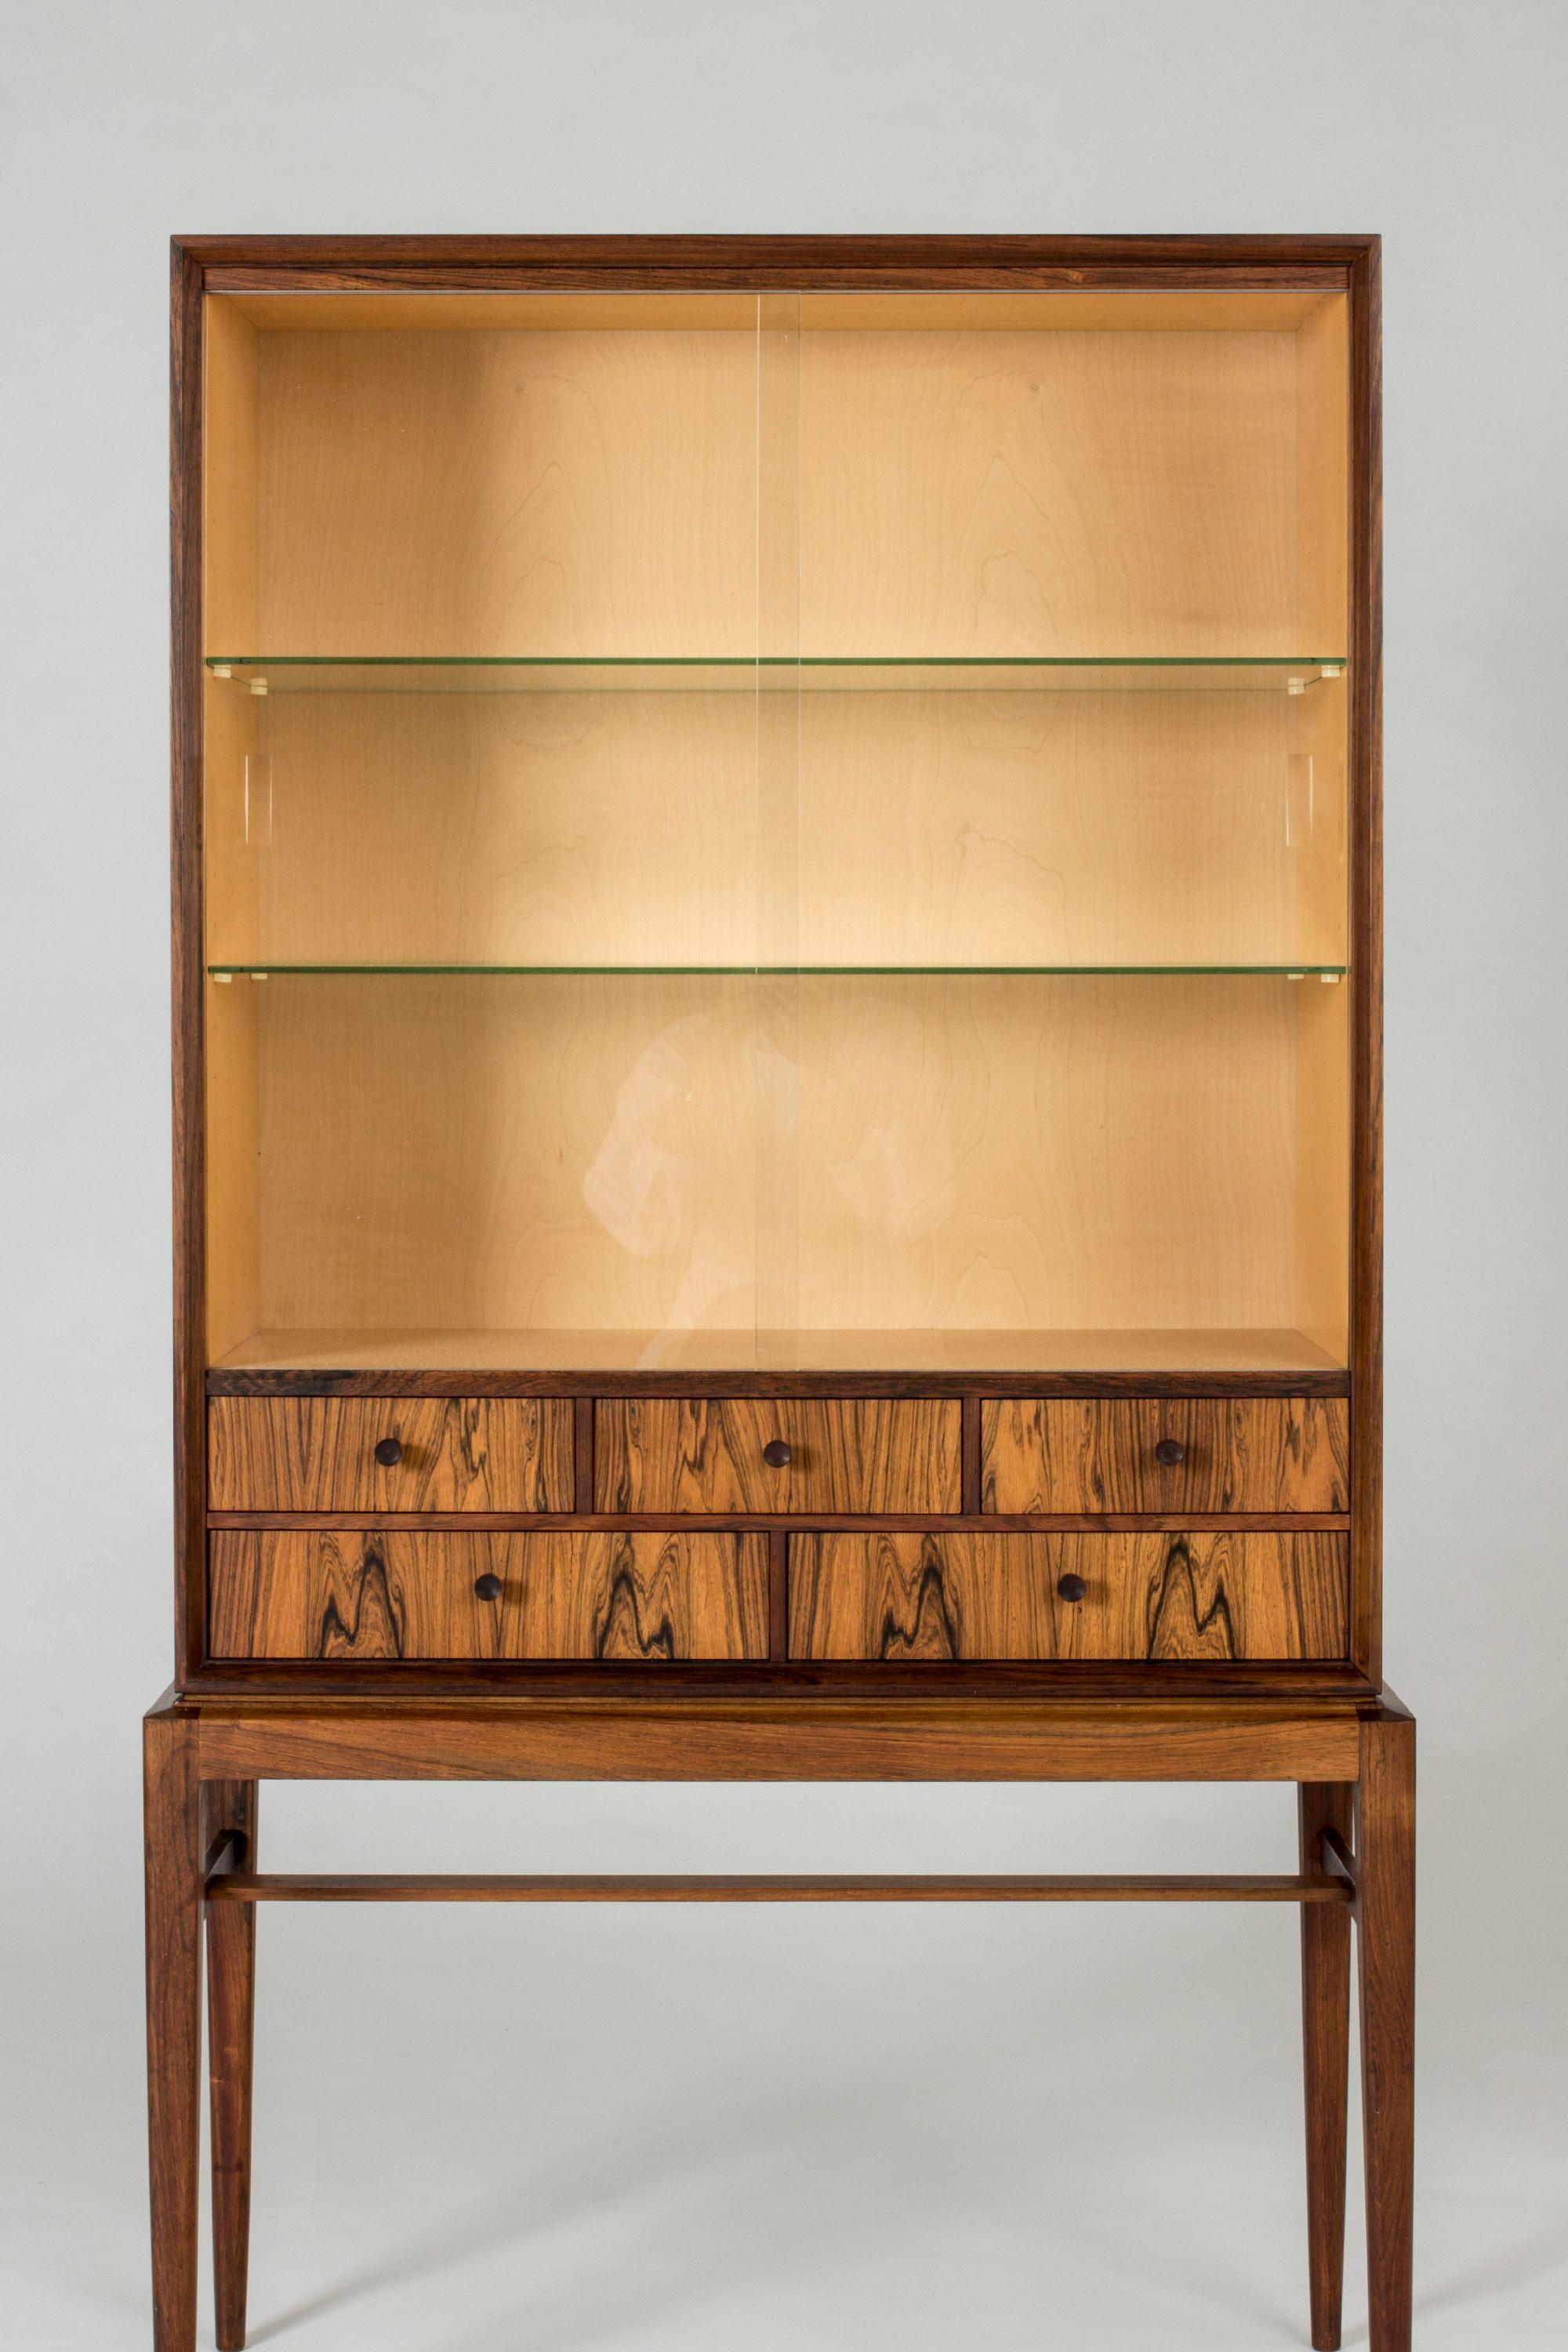 Swedish Midcentury Rosewood and Glass Vitrine Cabinet by Svante Skogh for Seffle